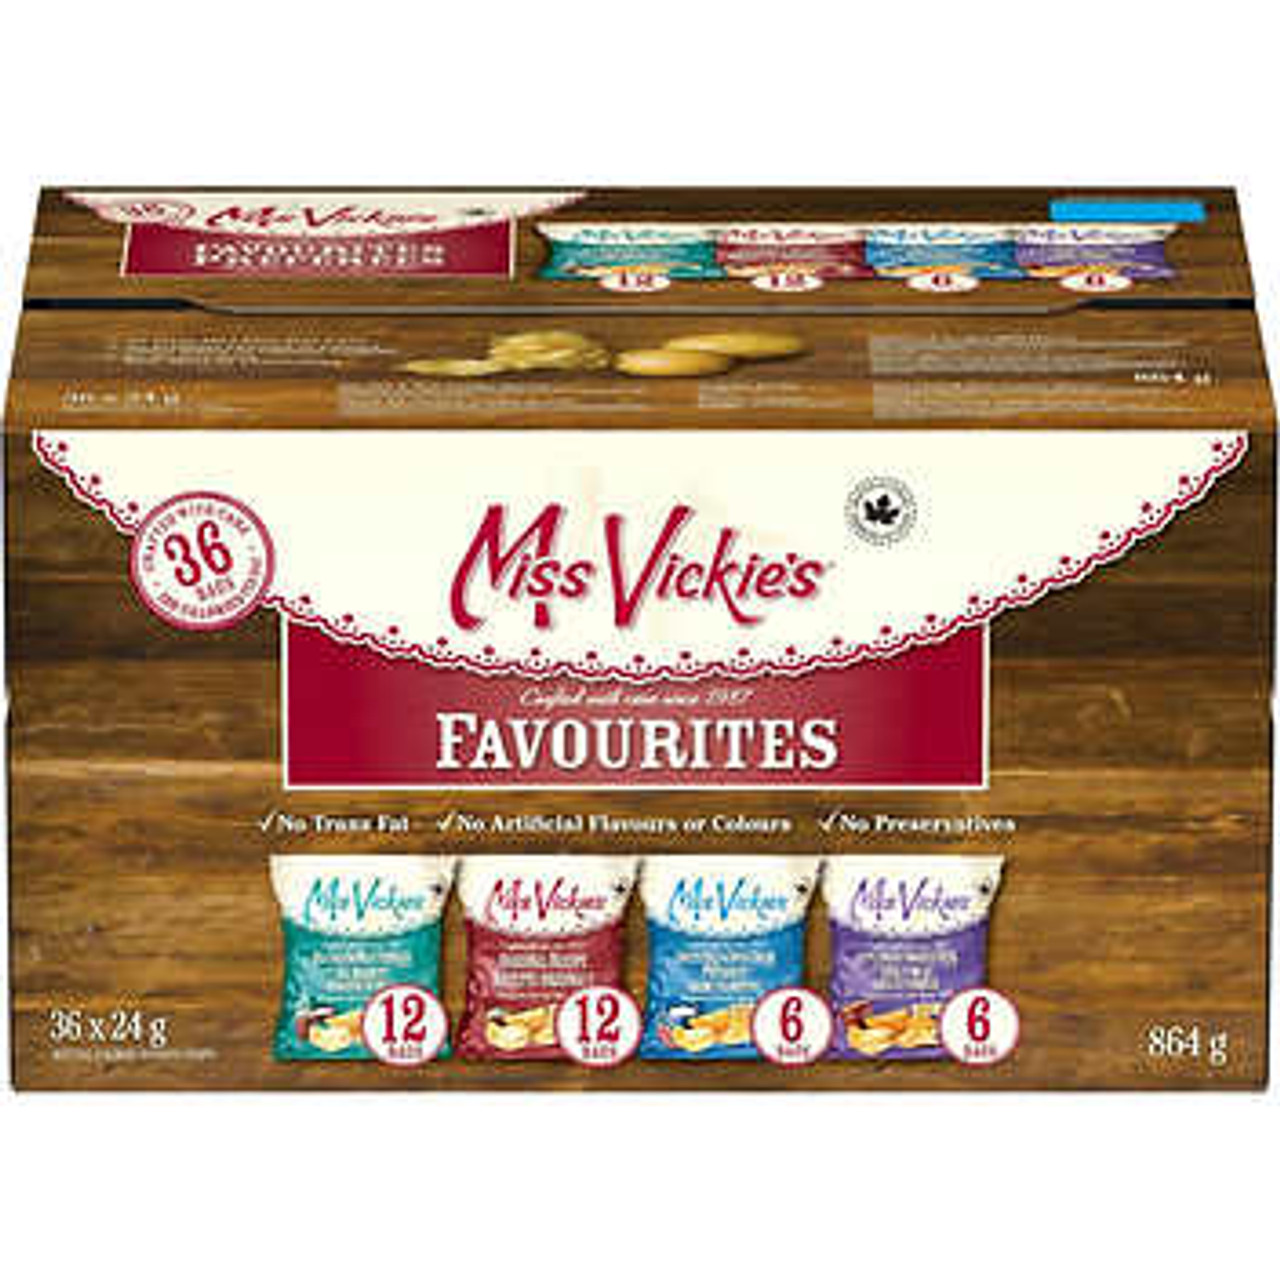 Miss Vickie's Potato Chips Variety Pack - 36 Bags, 24g Each - Savory Snack Assortment- Chicken Pieces